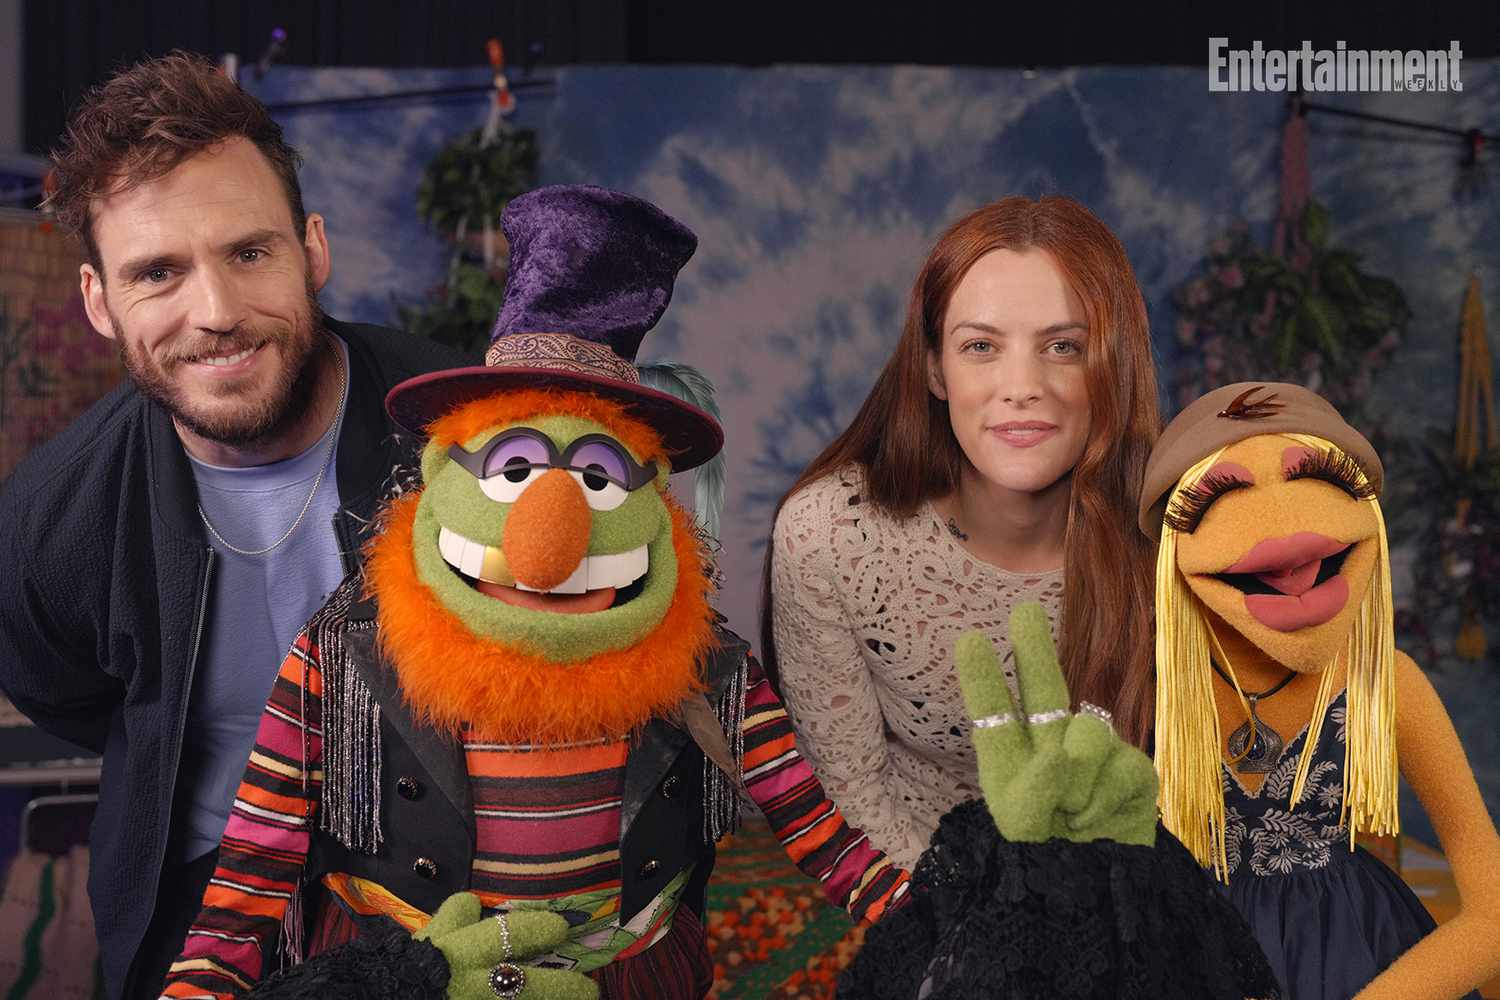 Sam Claflin and Riley Keough interview ‘The Muppets Mayhem’